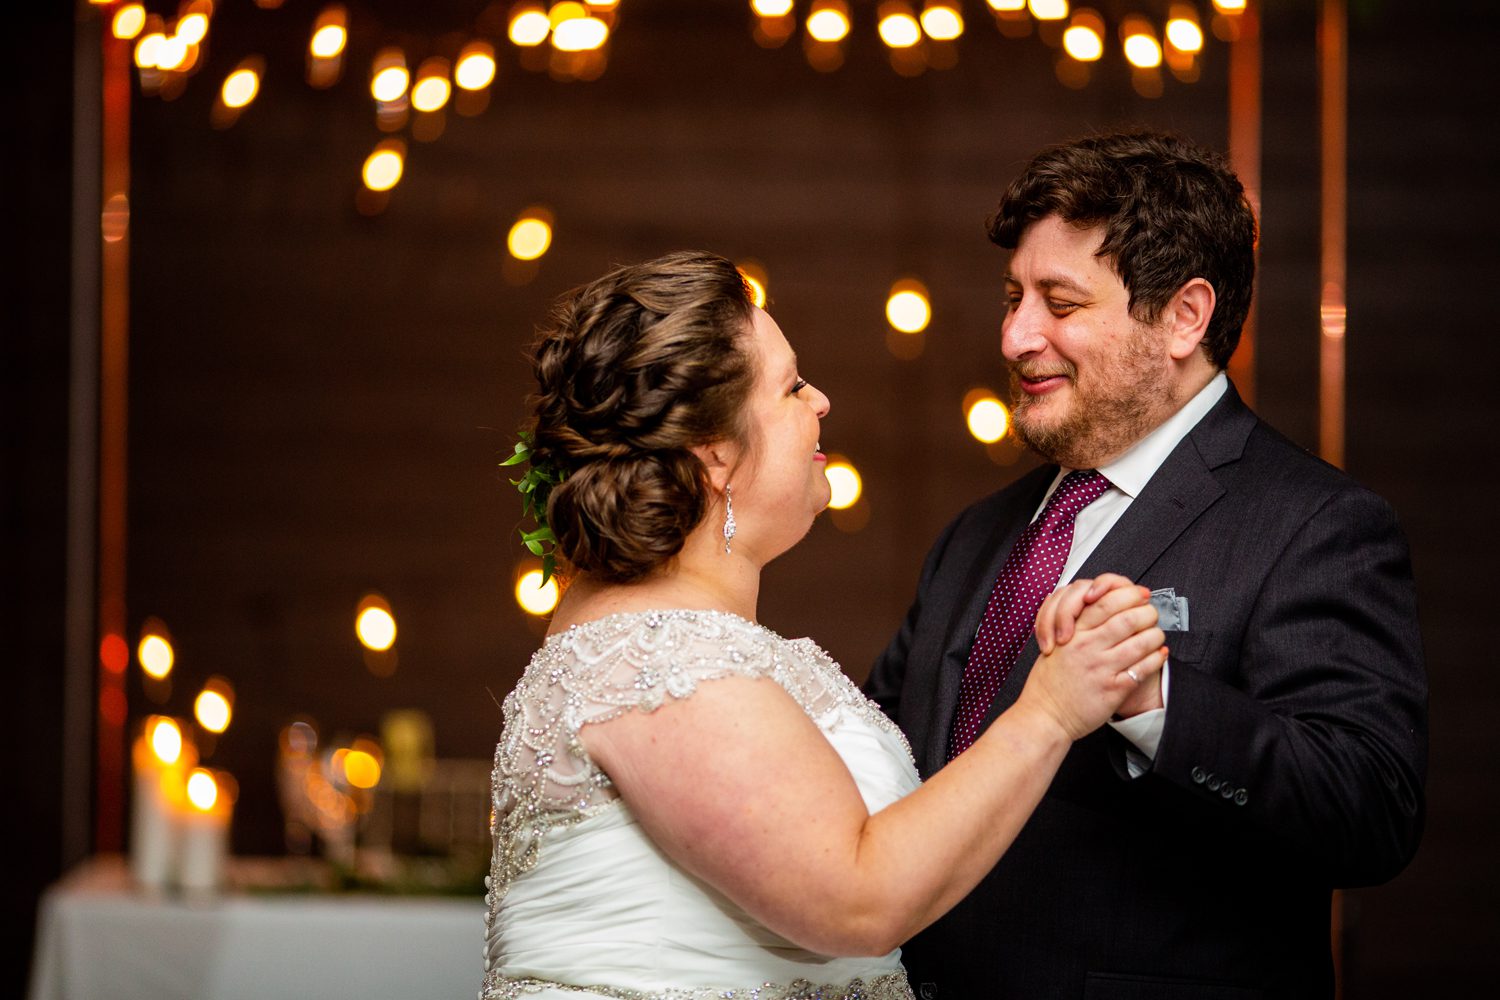 First Dance With Twinkly Lights